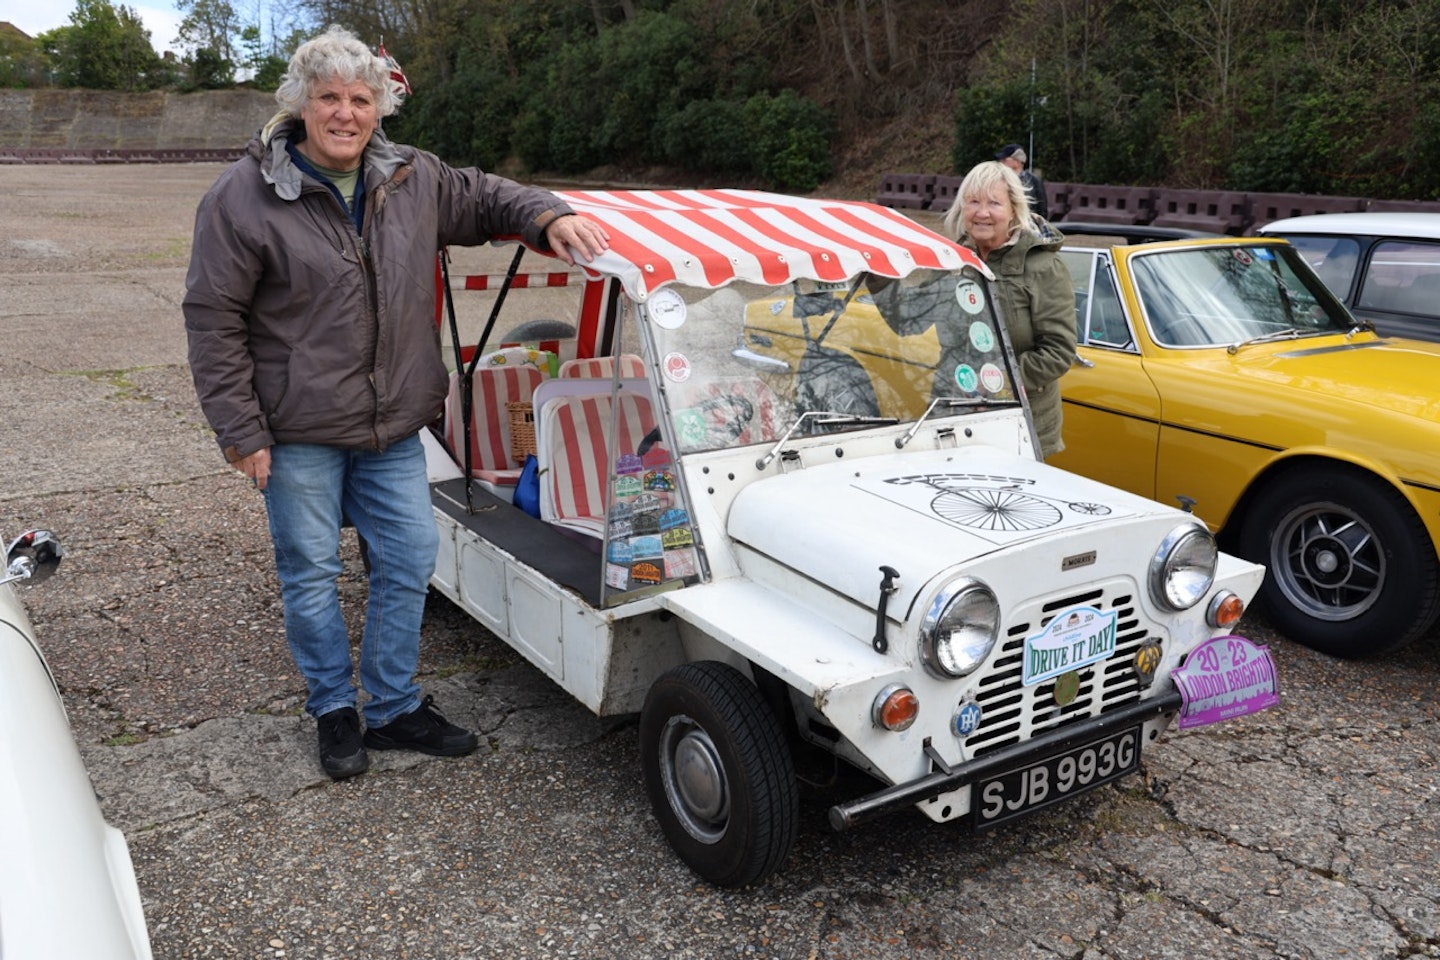 Ian and Viv Watson of Epsom with the 1968 Mini Moke they’ve owned for 40 years. And yes, they are fans of The Prisoner TV series.